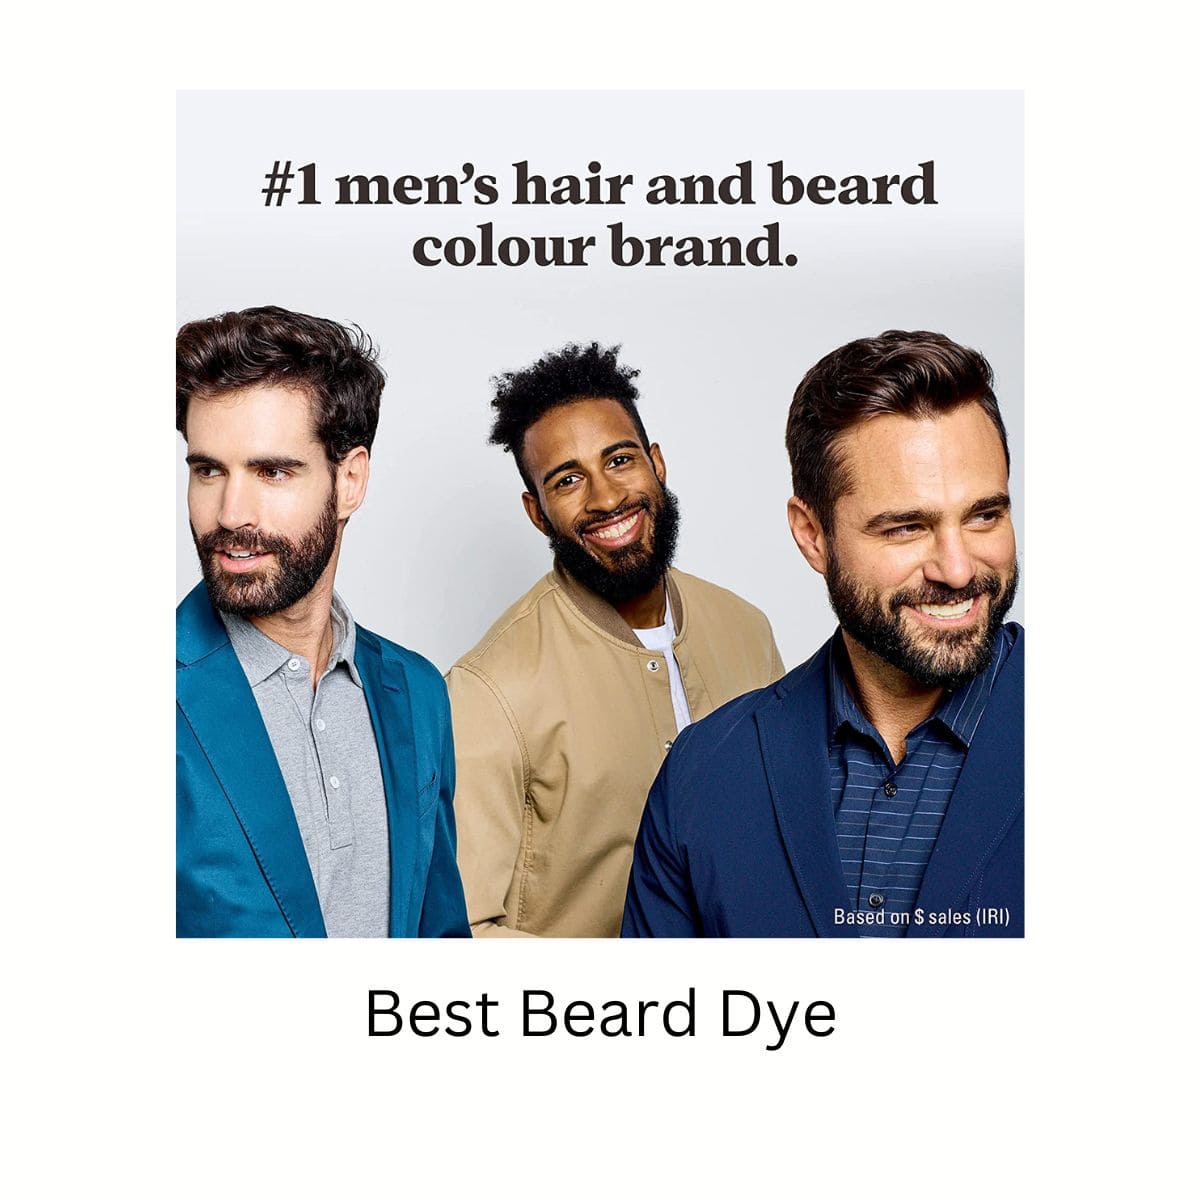 3 men with breads using beard dyes